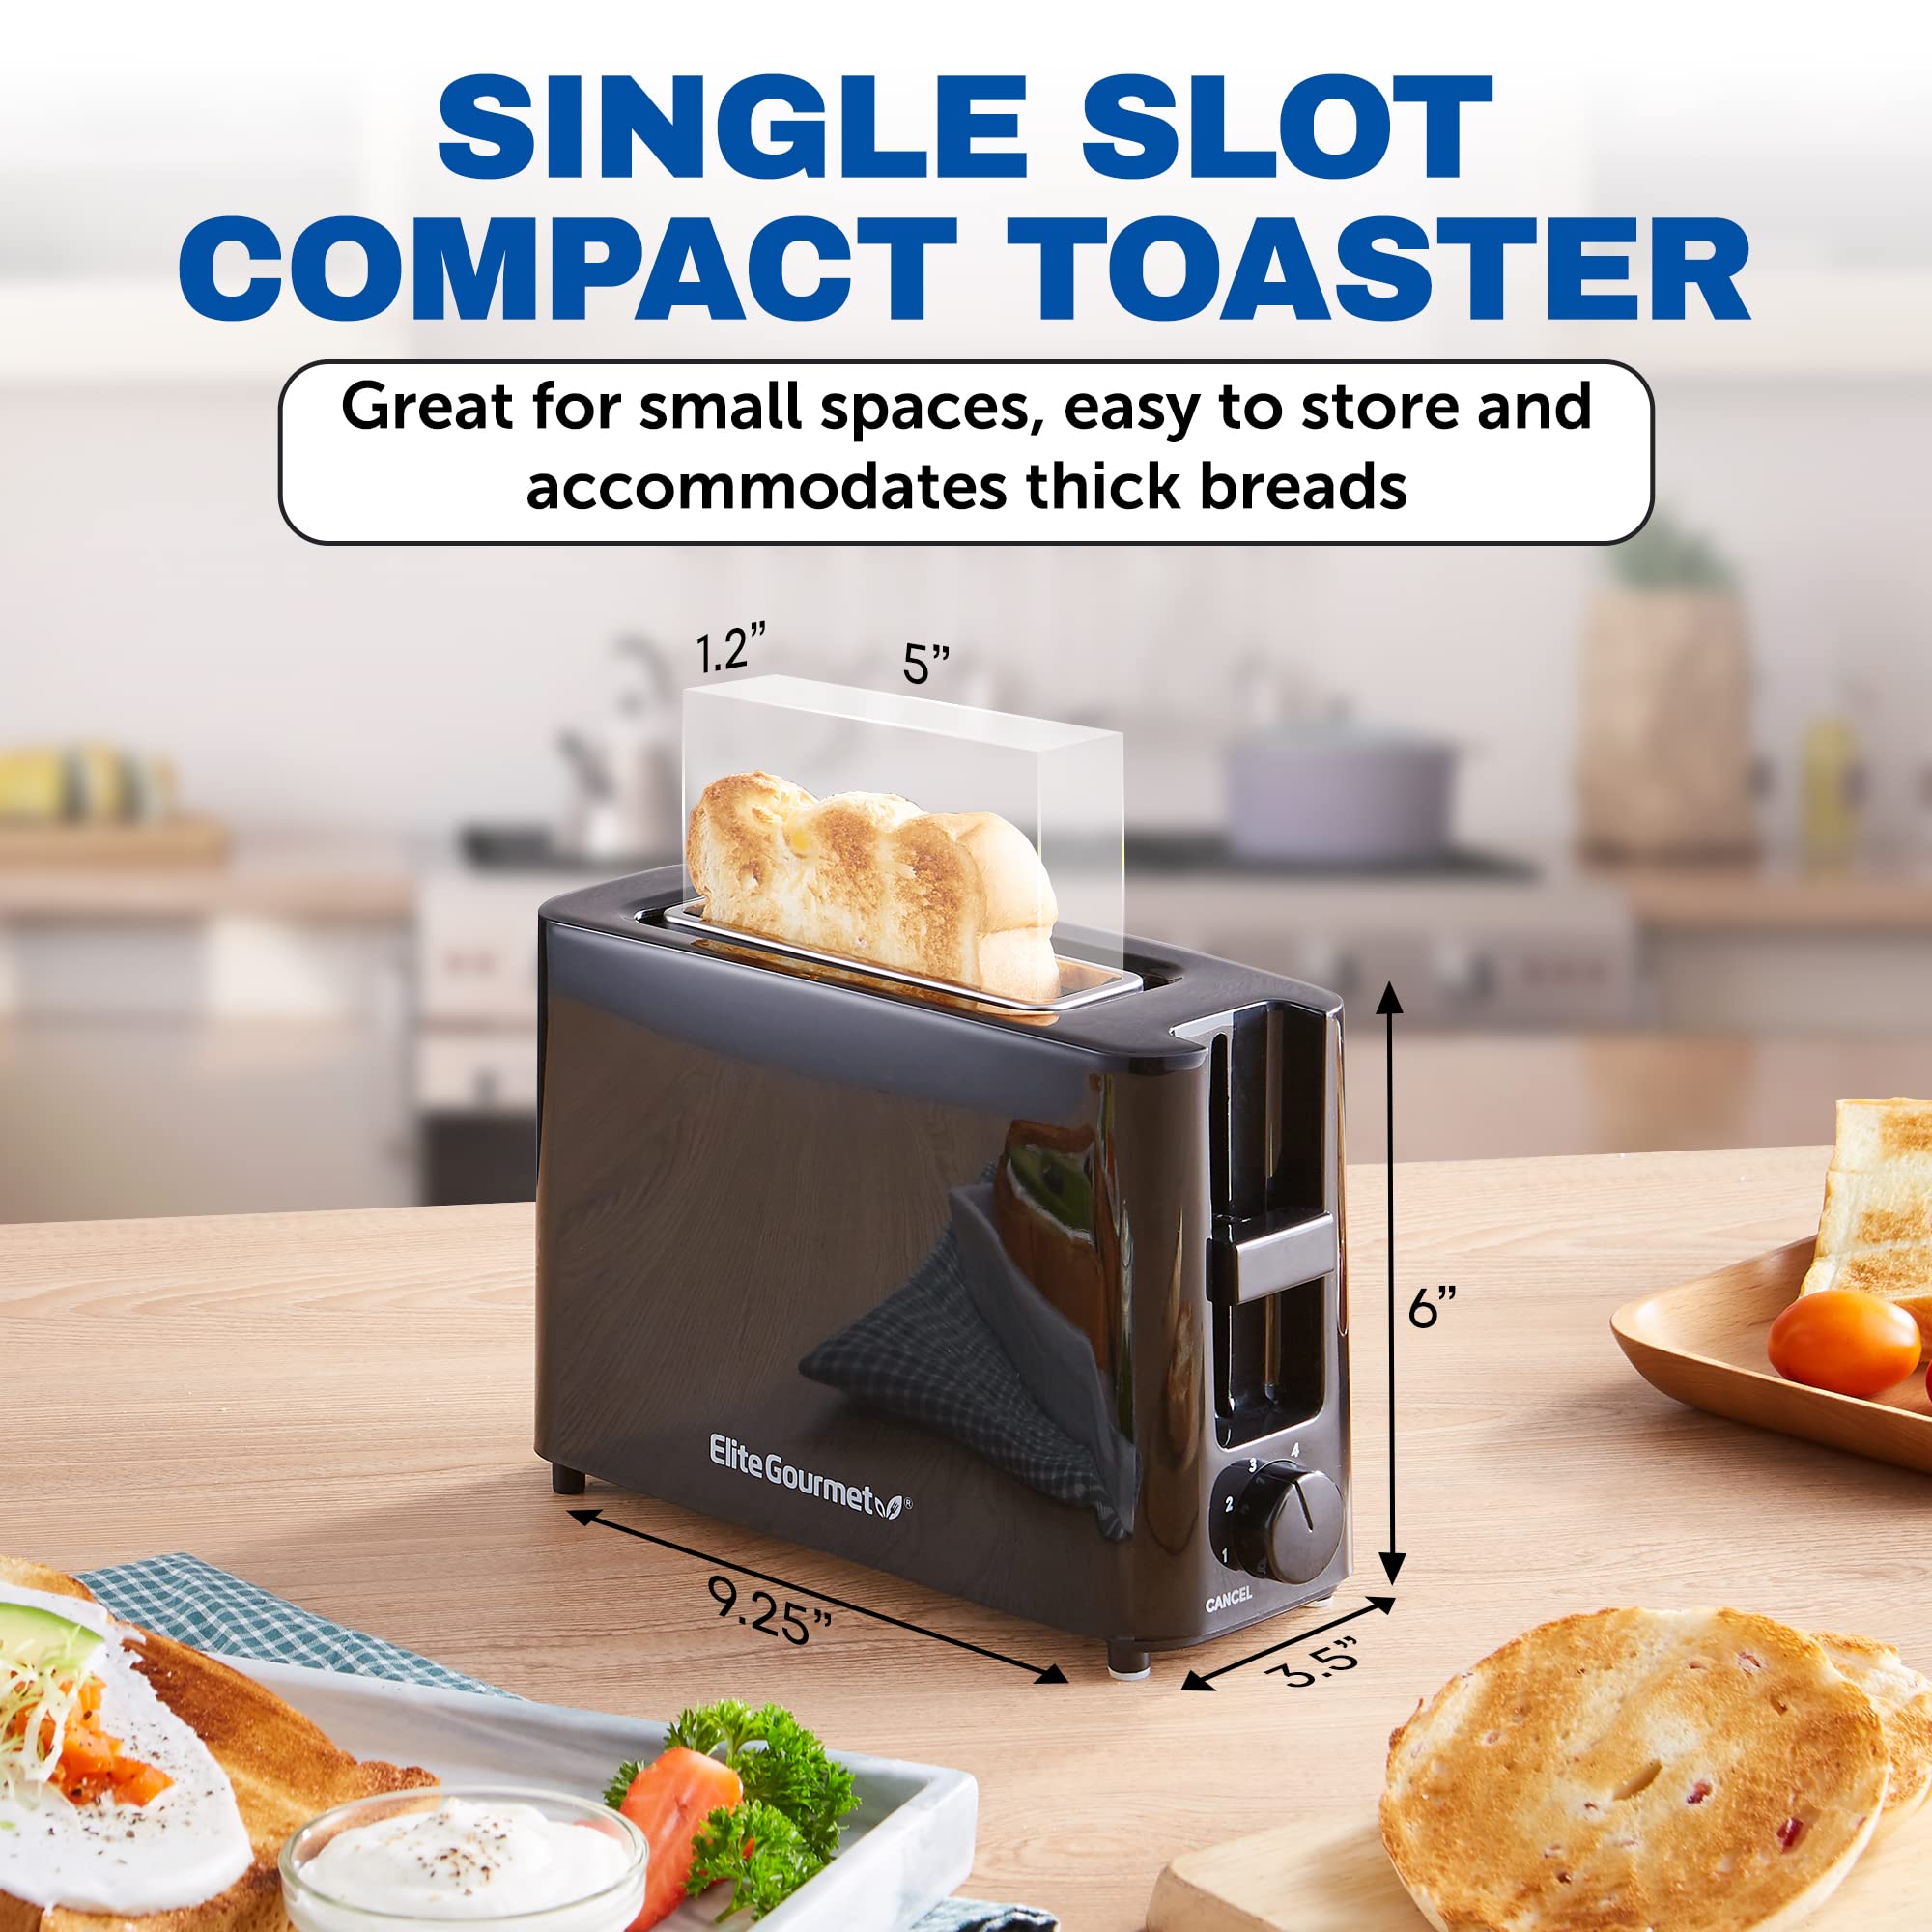 Elite Gourmet ECT118B Cool Touch Single Slice Toaster, 6 Toasting Levels & Wide Slot for Bagels, Waffles, Specialty Breads, Pastry, Snacks, Black